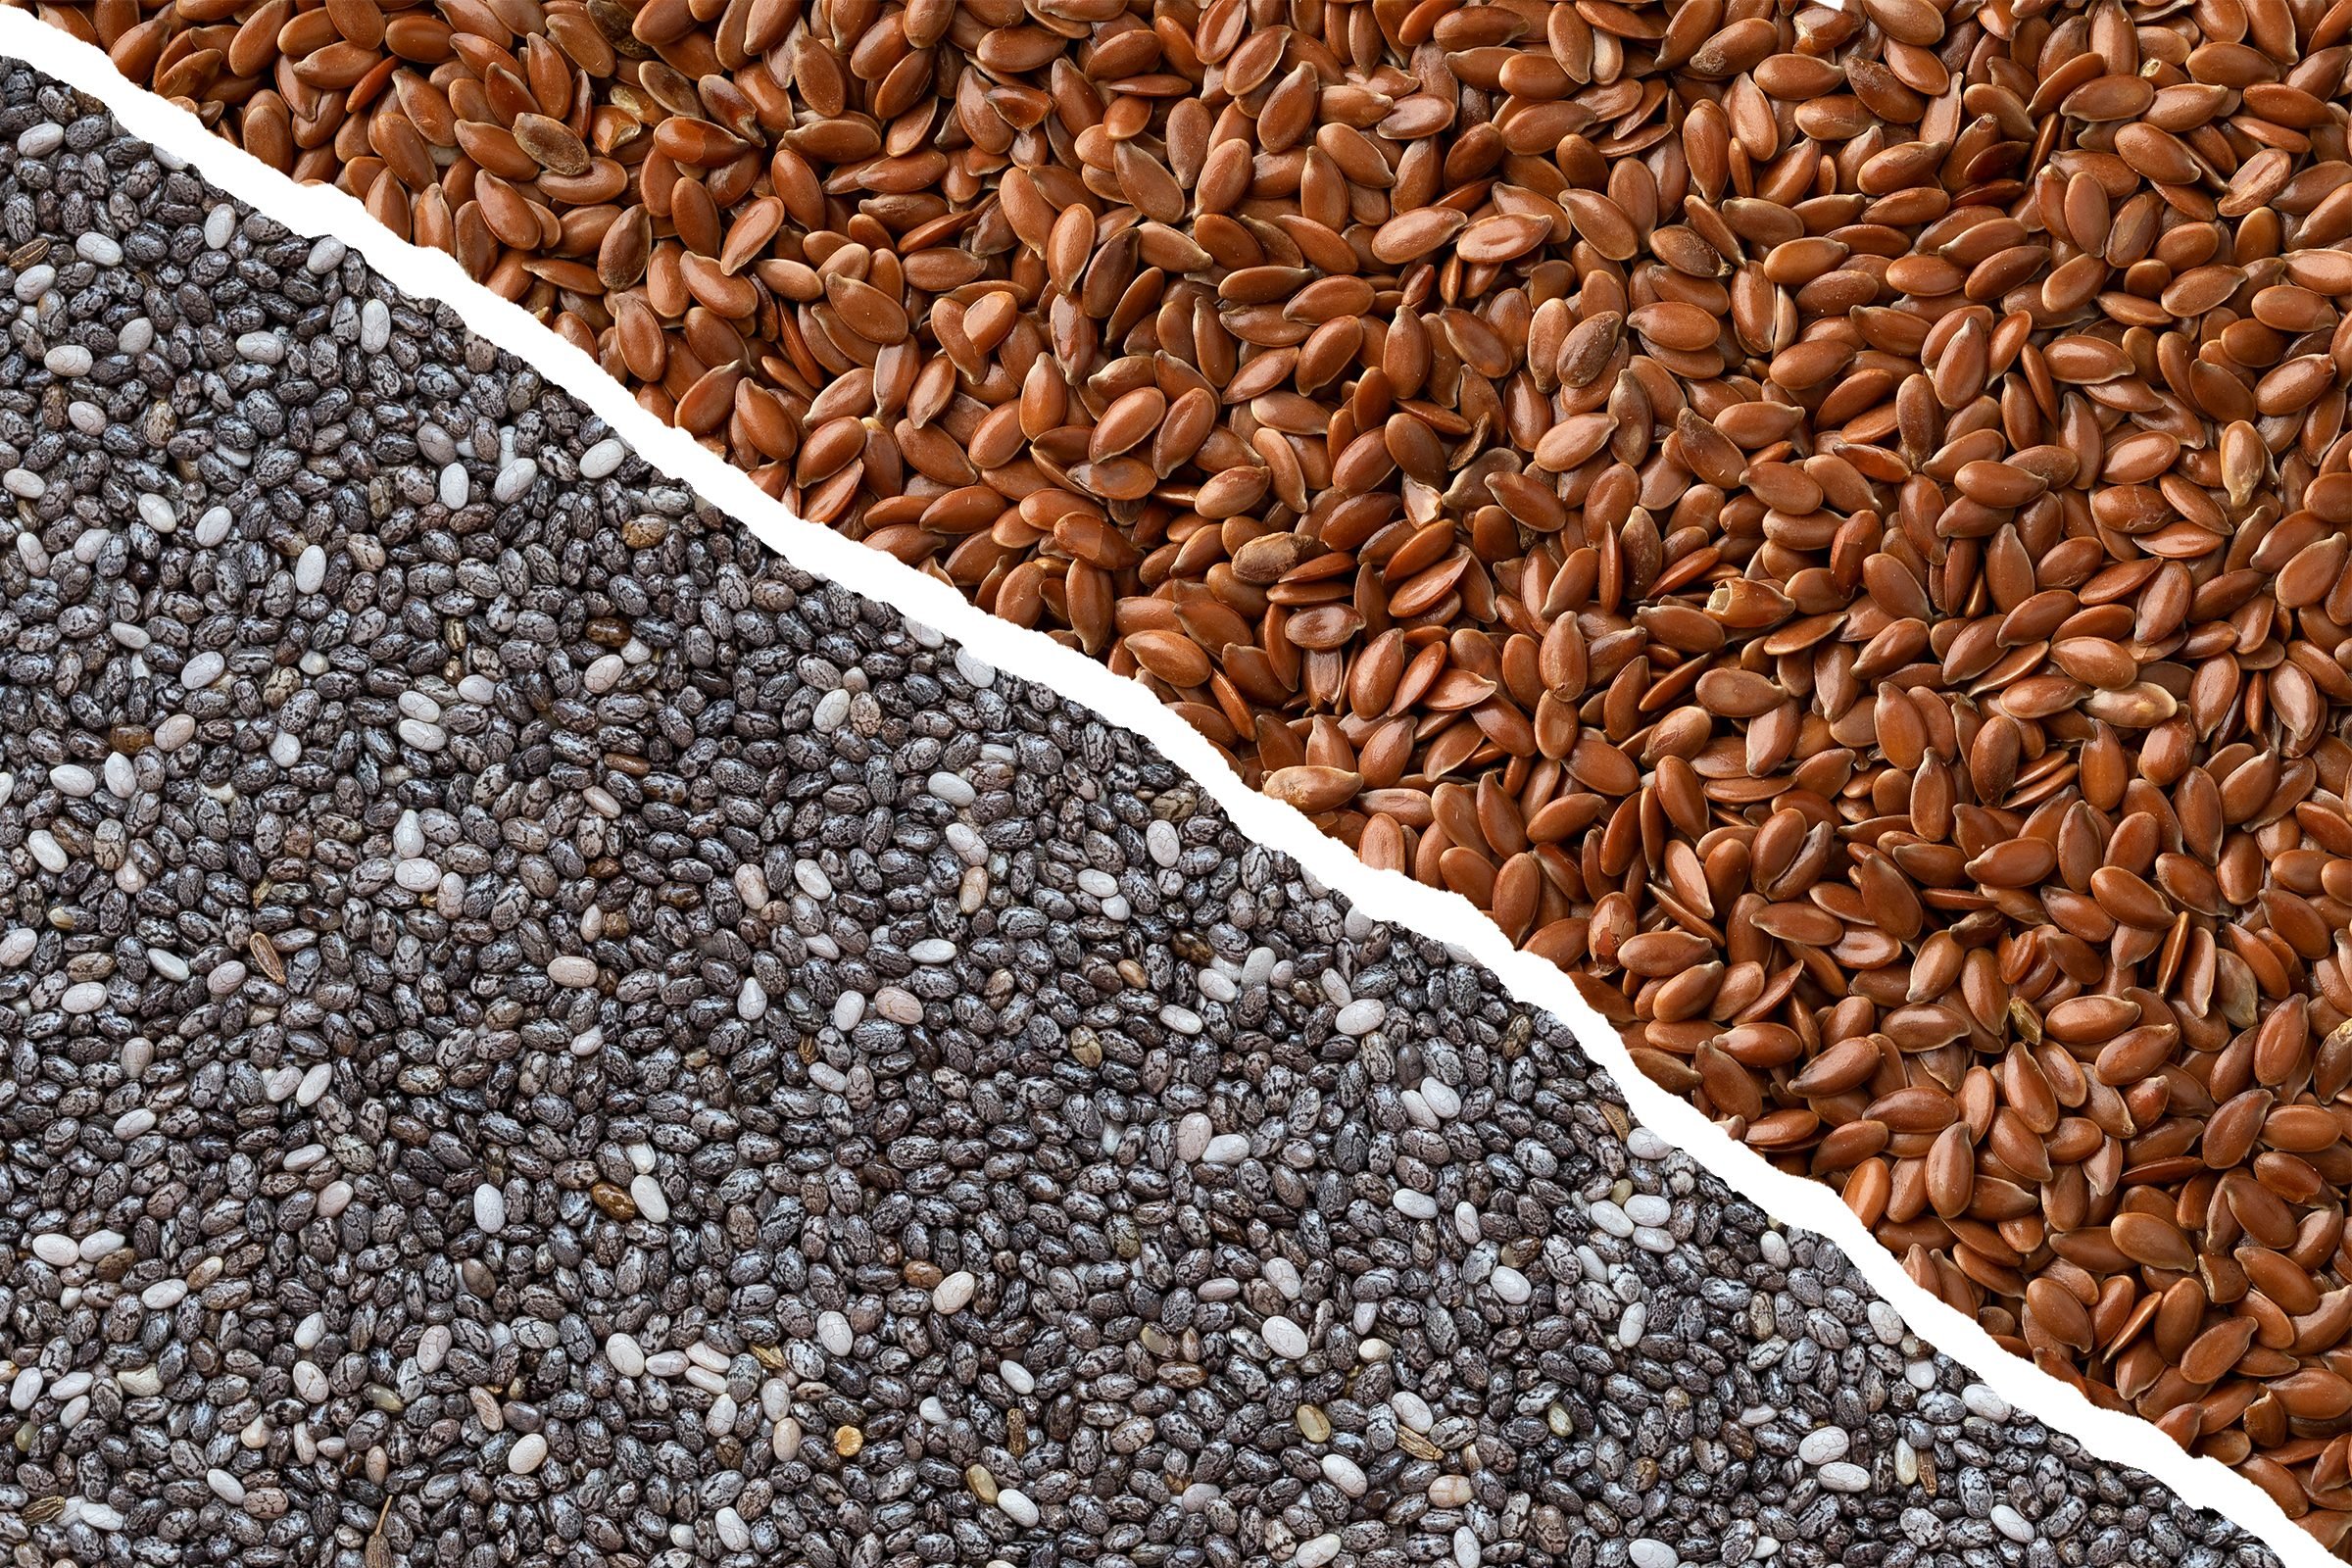 What is the Difference between Linseed and Flaxseed?